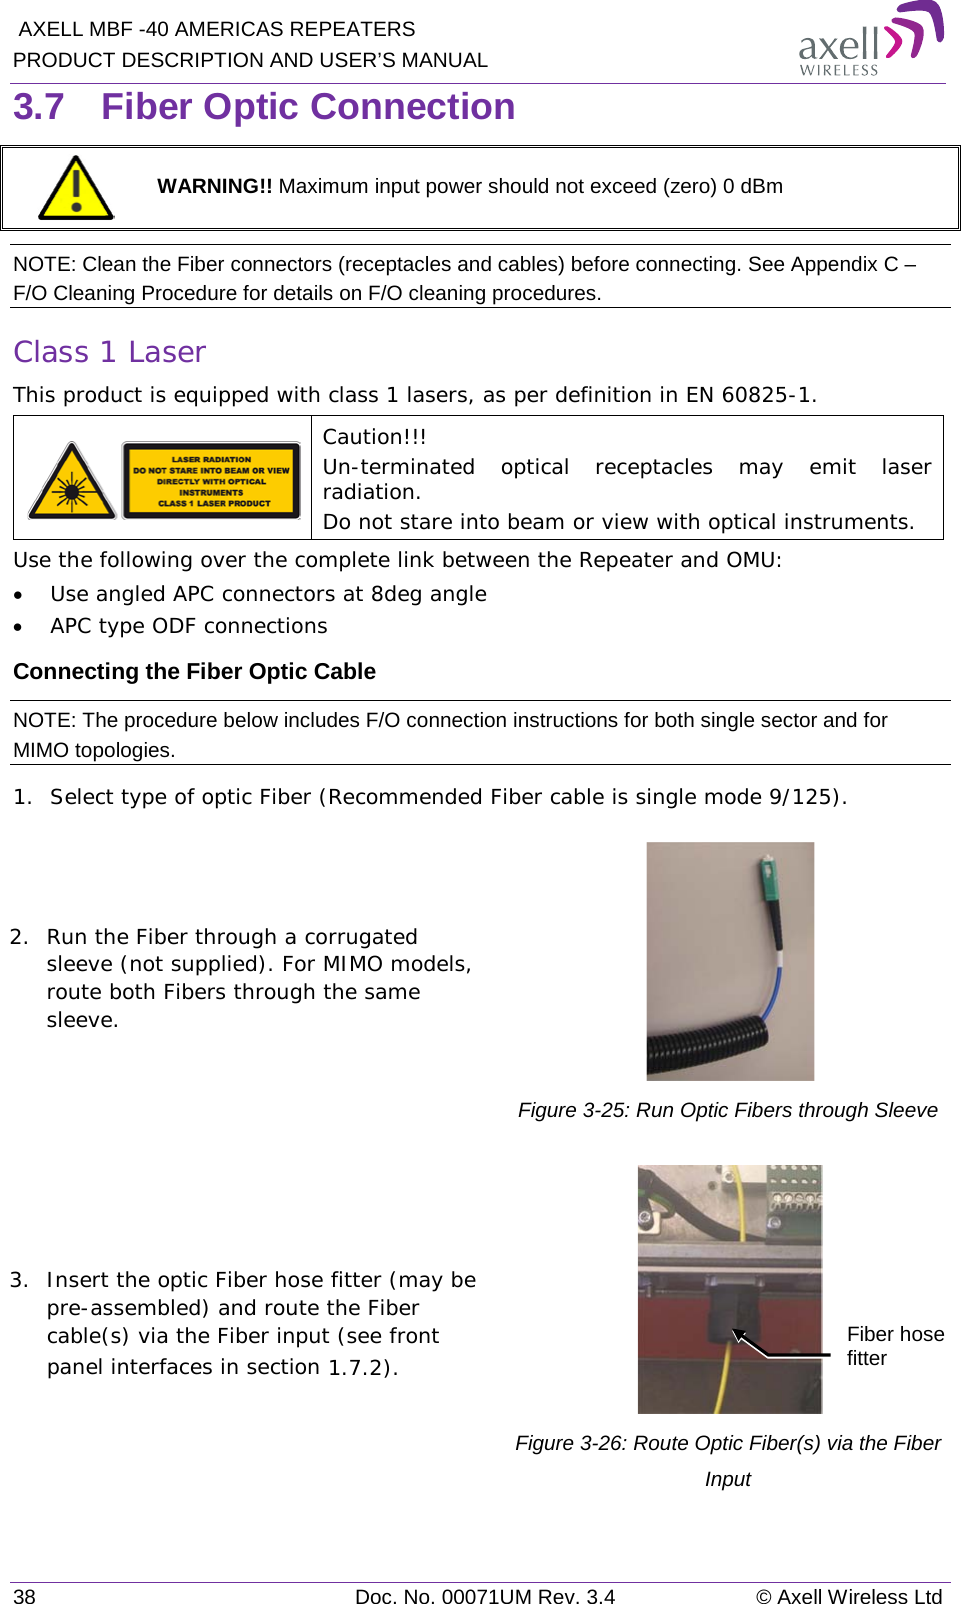  AXELL MBF -40 AMERICAS REPEATERS PRODUCT DESCRIPTION AND USER’S MANUAL 38 Doc. No. 00071UM Rev. 3.4 © Axell Wireless Ltd 3.7  Fiber Optic Connection  WARNING!! Maximum input power should not exceed (zero) 0 dBm NOTE: Clean the Fiber connectors (receptacles and cables) before connecting. See Appendix C – F/O Cleaning Procedure for details on F/O cleaning procedures. Class 1 Laser This product is equipped with class 1 lasers, as per definition in EN 60825-1.   Caution!!! Un-terminated optical receptacles may emit laser radiation.  Do not stare into beam or view with optical instruments. Use the following over the complete link between the Repeater and OMU: • Use angled APC connectors at 8deg angle • APC type ODF connections Connecting the Fiber Optic Cable NOTE: The procedure below includes F/O connection instructions for both single sector and for MIMO topologies. 1.  Select type of optic Fiber (Recommended Fiber cable is single mode 9/125). 2.  Run the Fiber through a corrugated sleeve (not supplied). For MIMO models, route both Fibers through the same sleeve.  Figure  3-25: Run Optic Fibers through Sleeve 3.  Insert the optic Fiber hose fitter (may be pre-assembled) and route the Fiber cable(s) via the Fiber input (see front panel interfaces in section  1.7.2).  Figure  3-26: Route Optic Fiber(s) via the Fiber Input Fiber hose fitter 